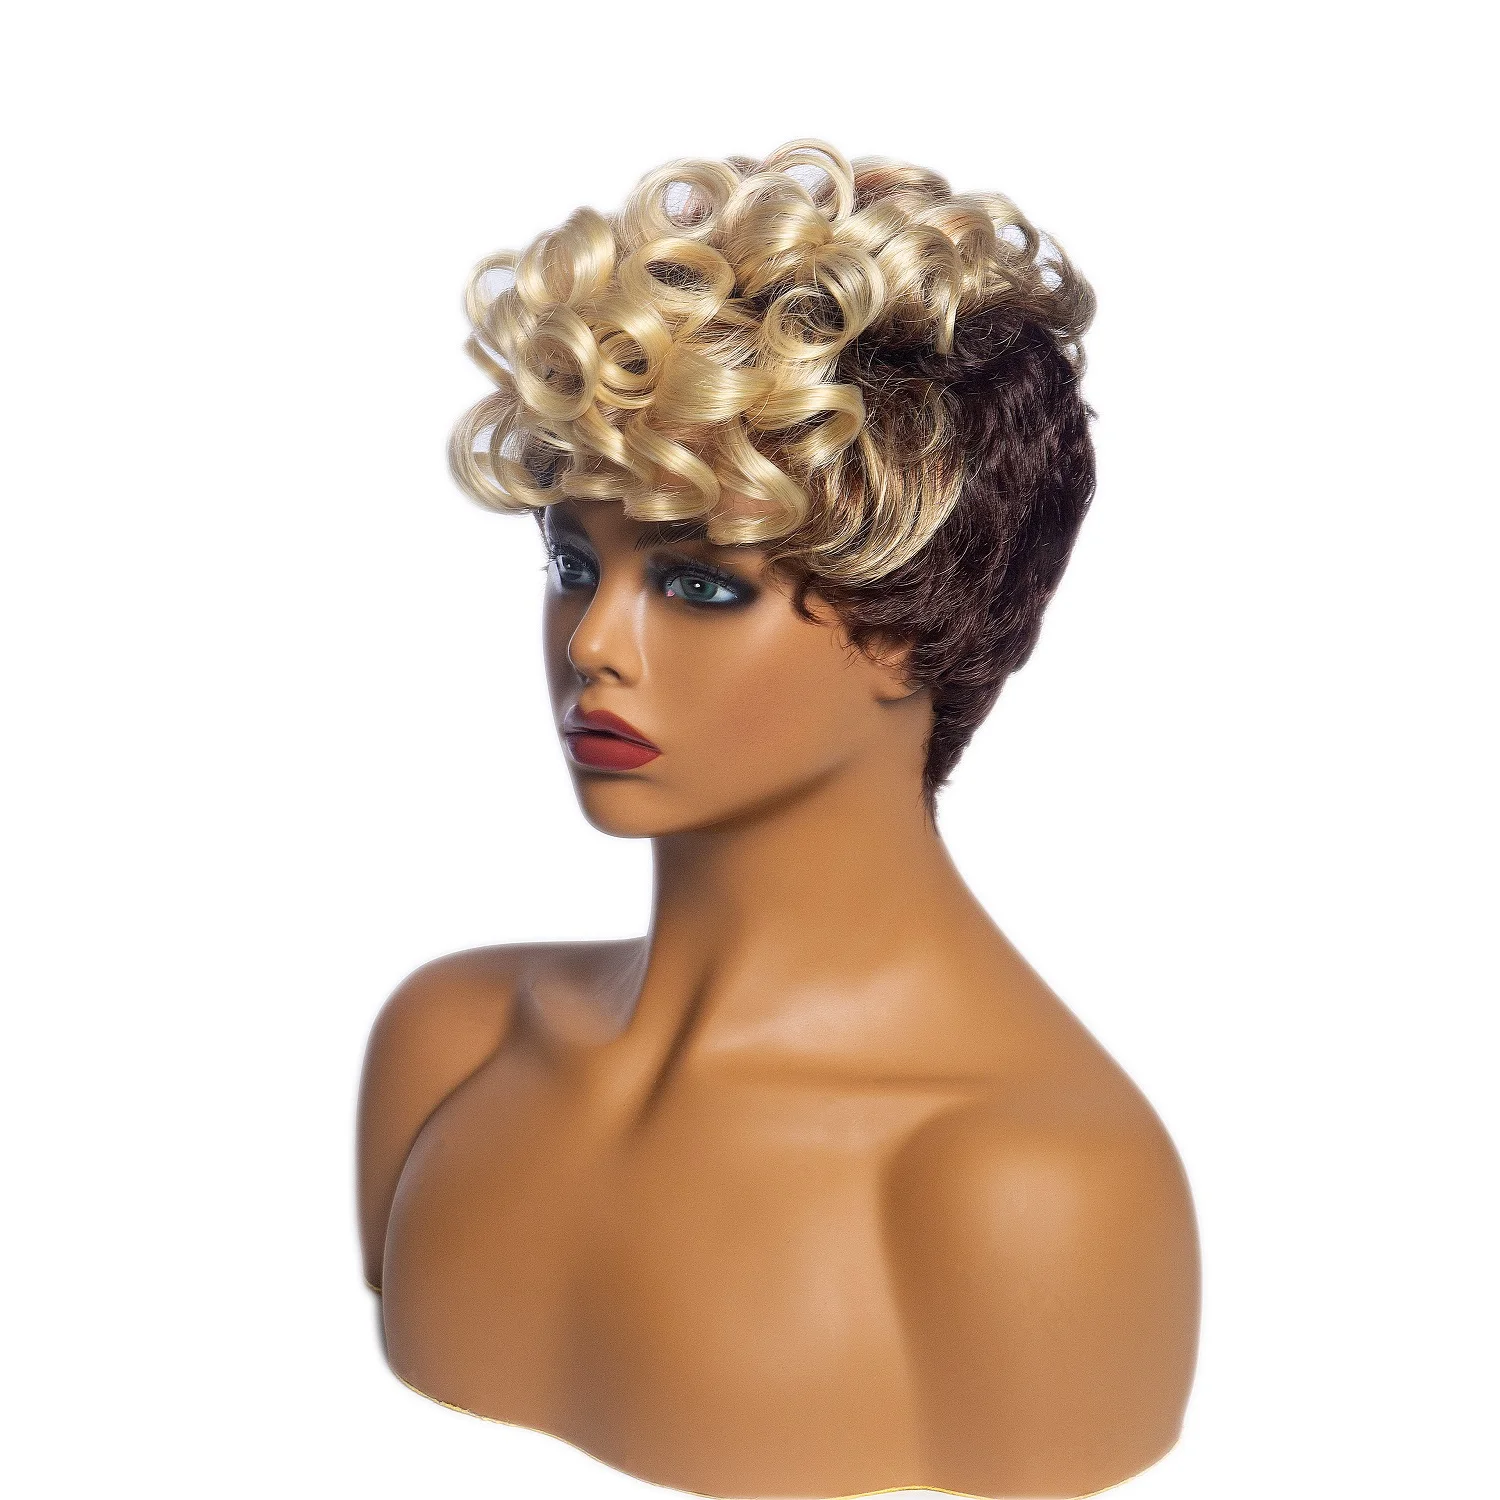 Brazlian Curly Hair Short Pixie Cut Hairstyle Pretty Blonde To Brown Heat Resistant Synthetic Afro Wavy Party Wigs for Women